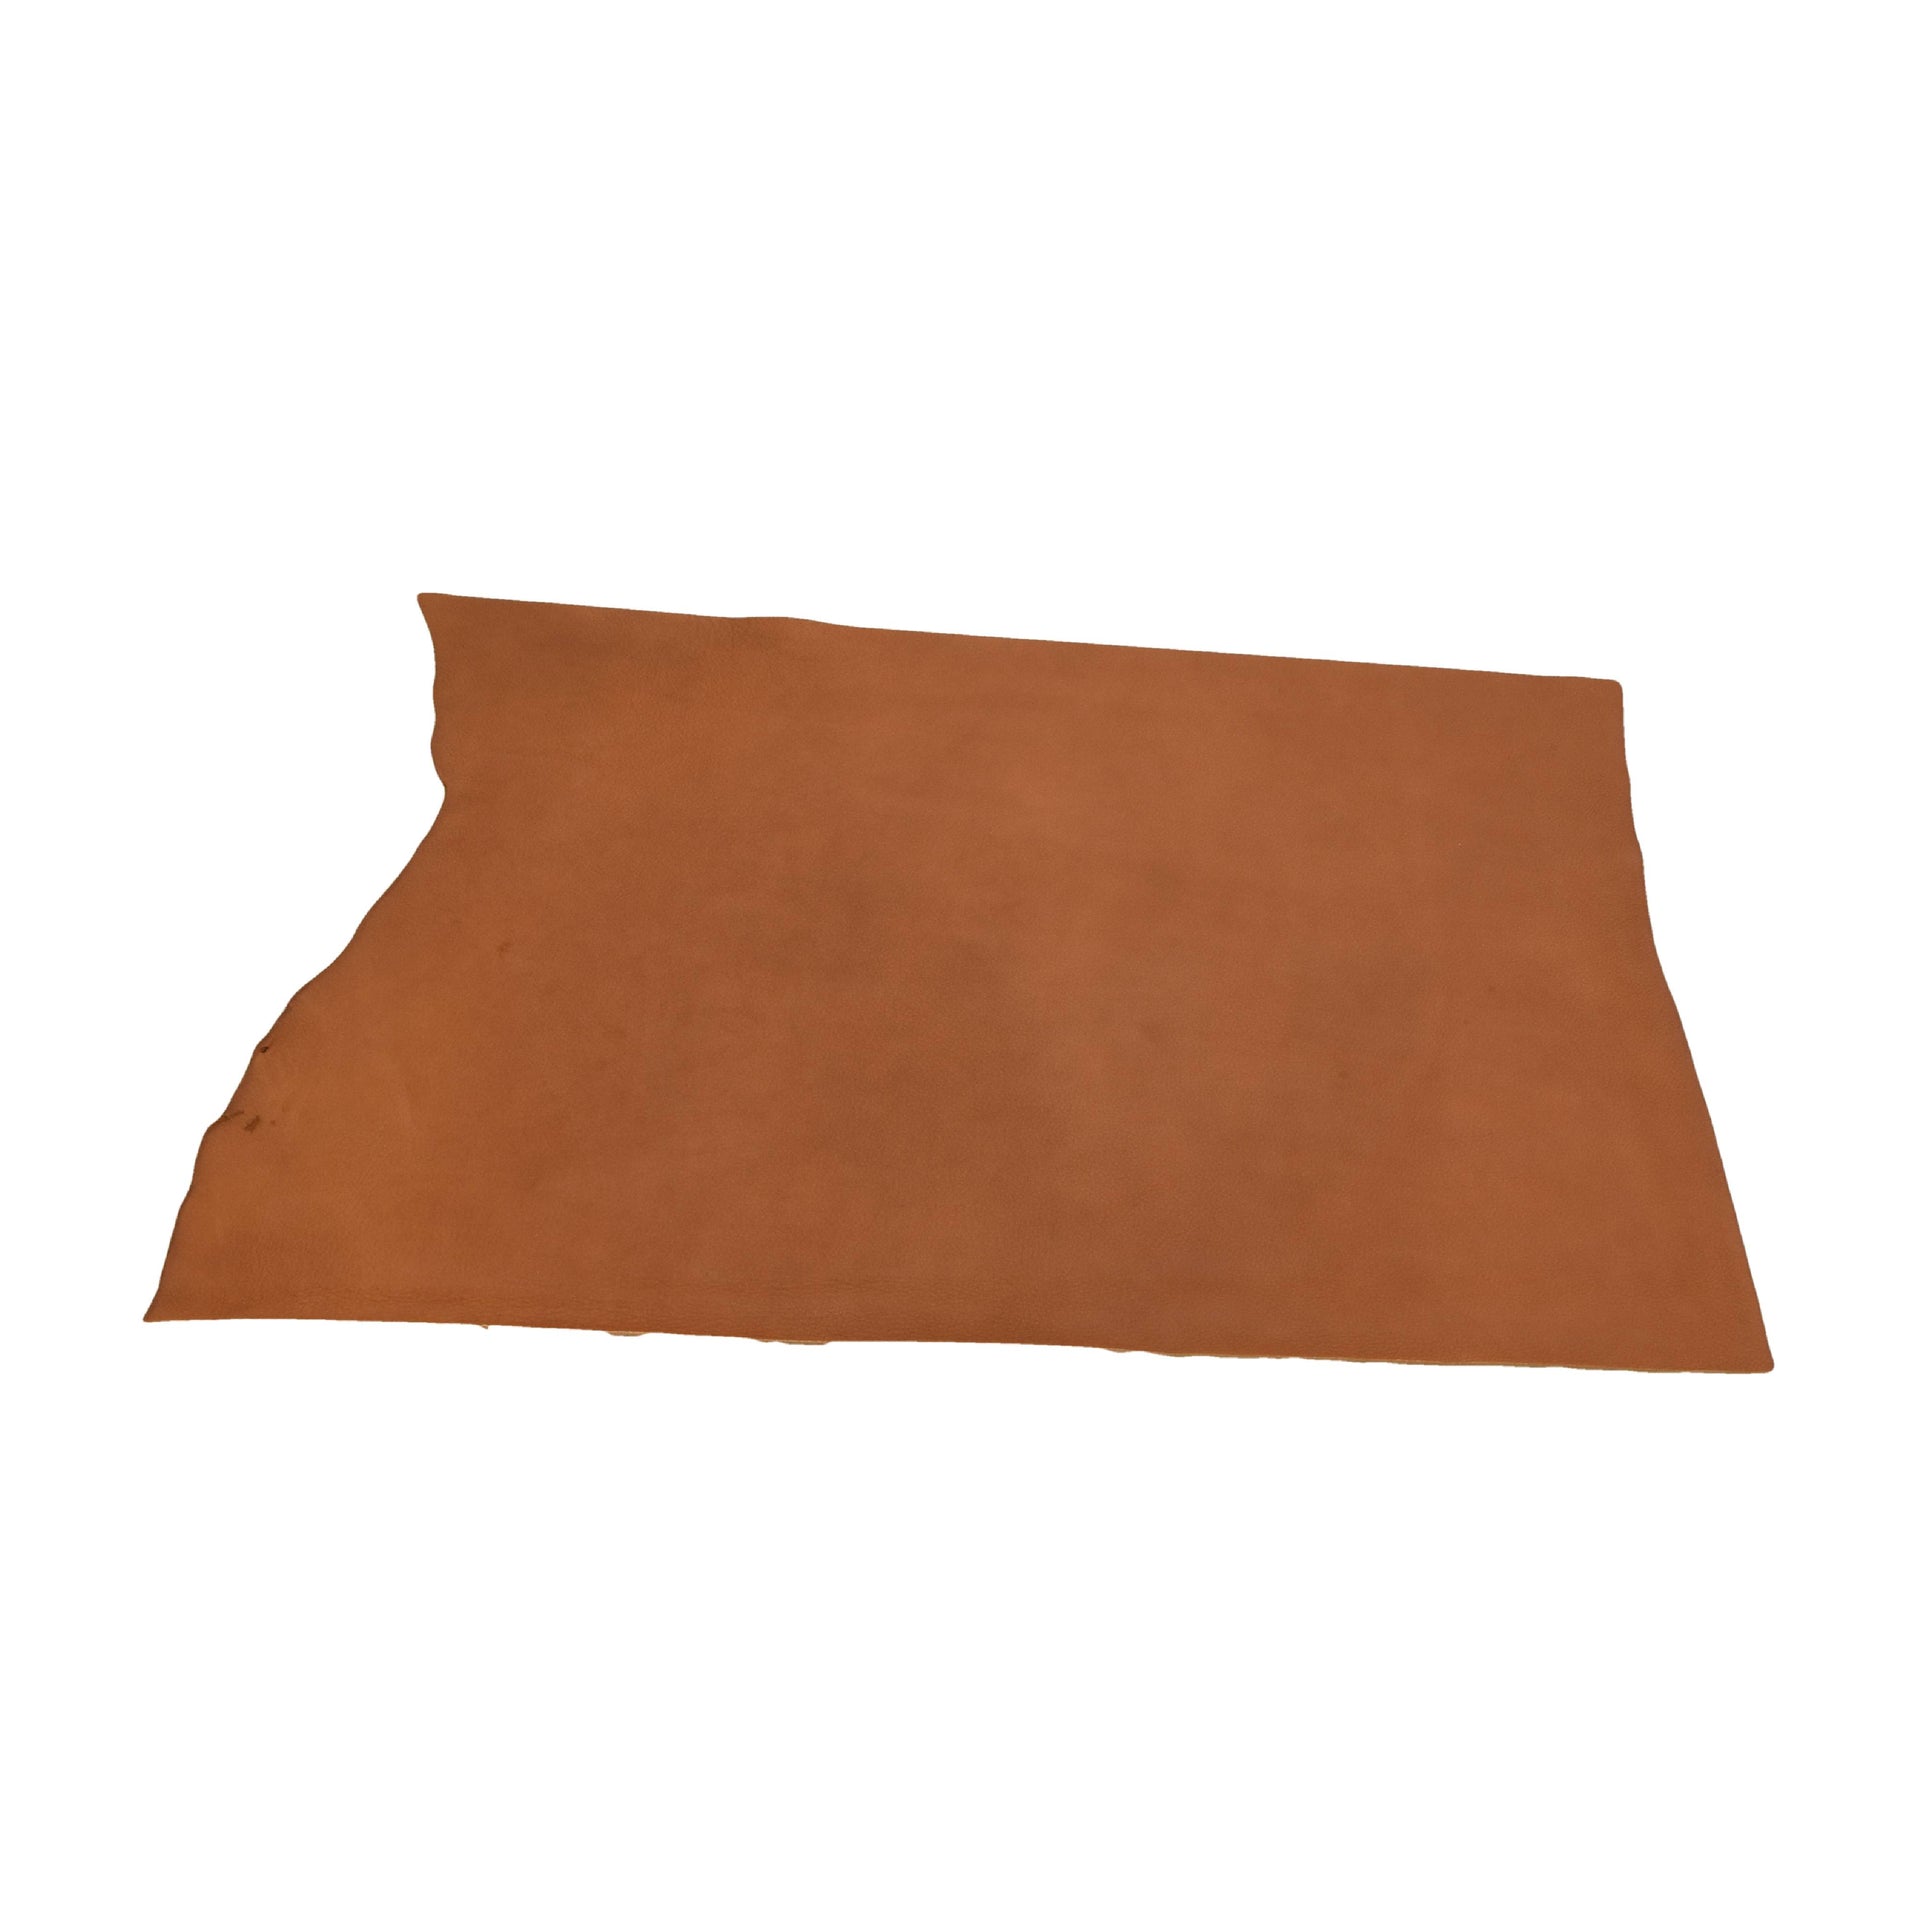 Base Camp Burnt Orange, Oil Tanned Summits Edge Sides & Pieces, 6.5-7.5 Square Foot / Project Piece (Middle) | The Leather Guy